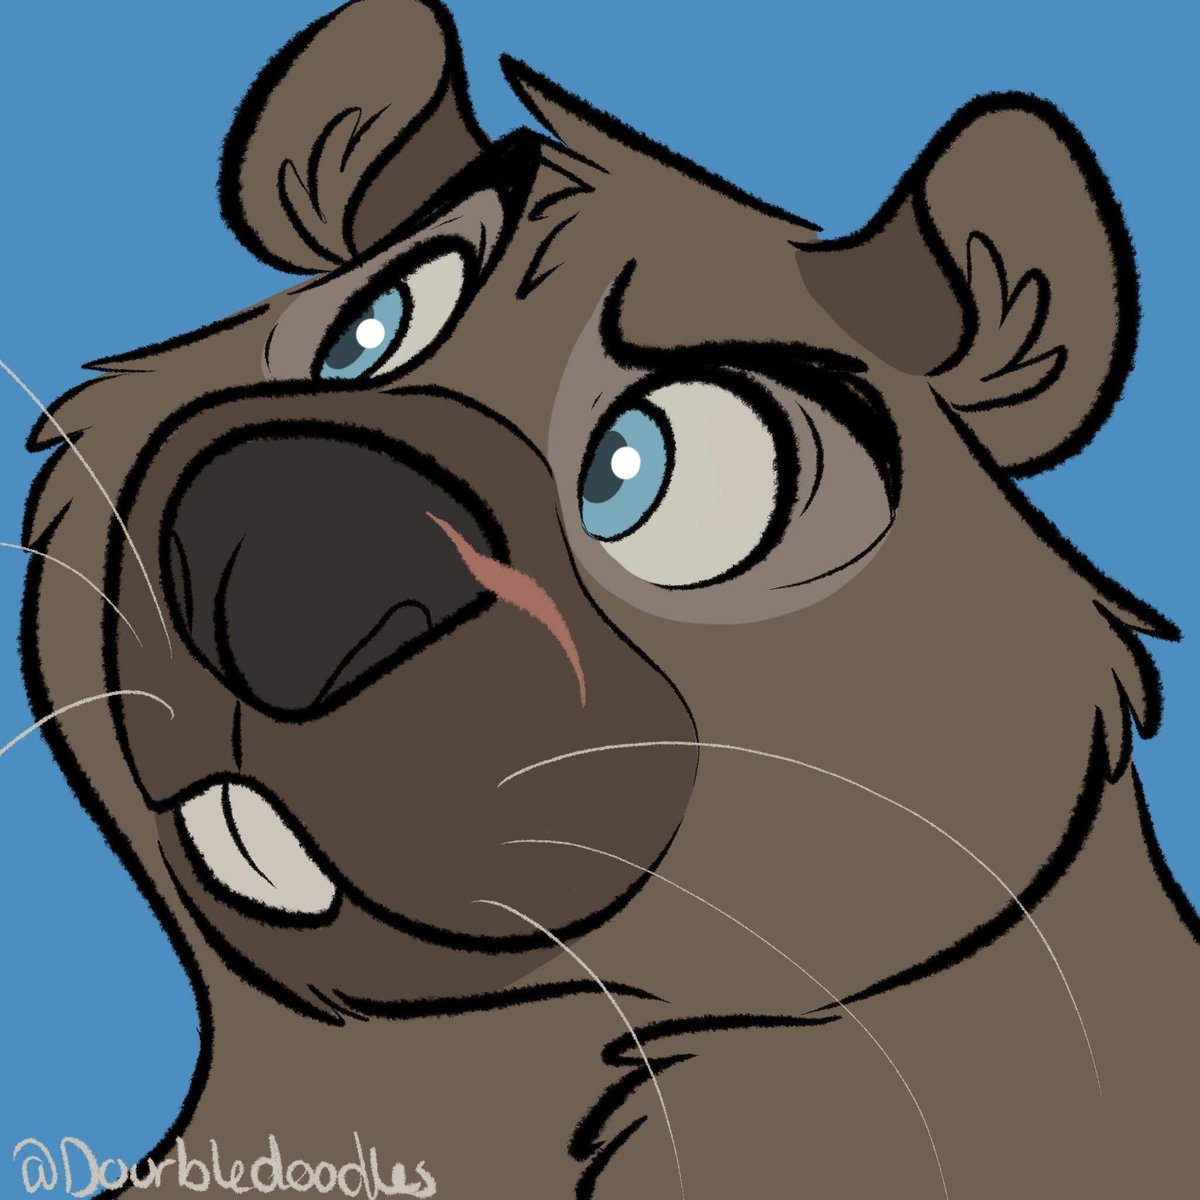 Oh hey, I commissioned a new icon. It's by @DourbleDoodles! Beware, beware, the wombat sees.